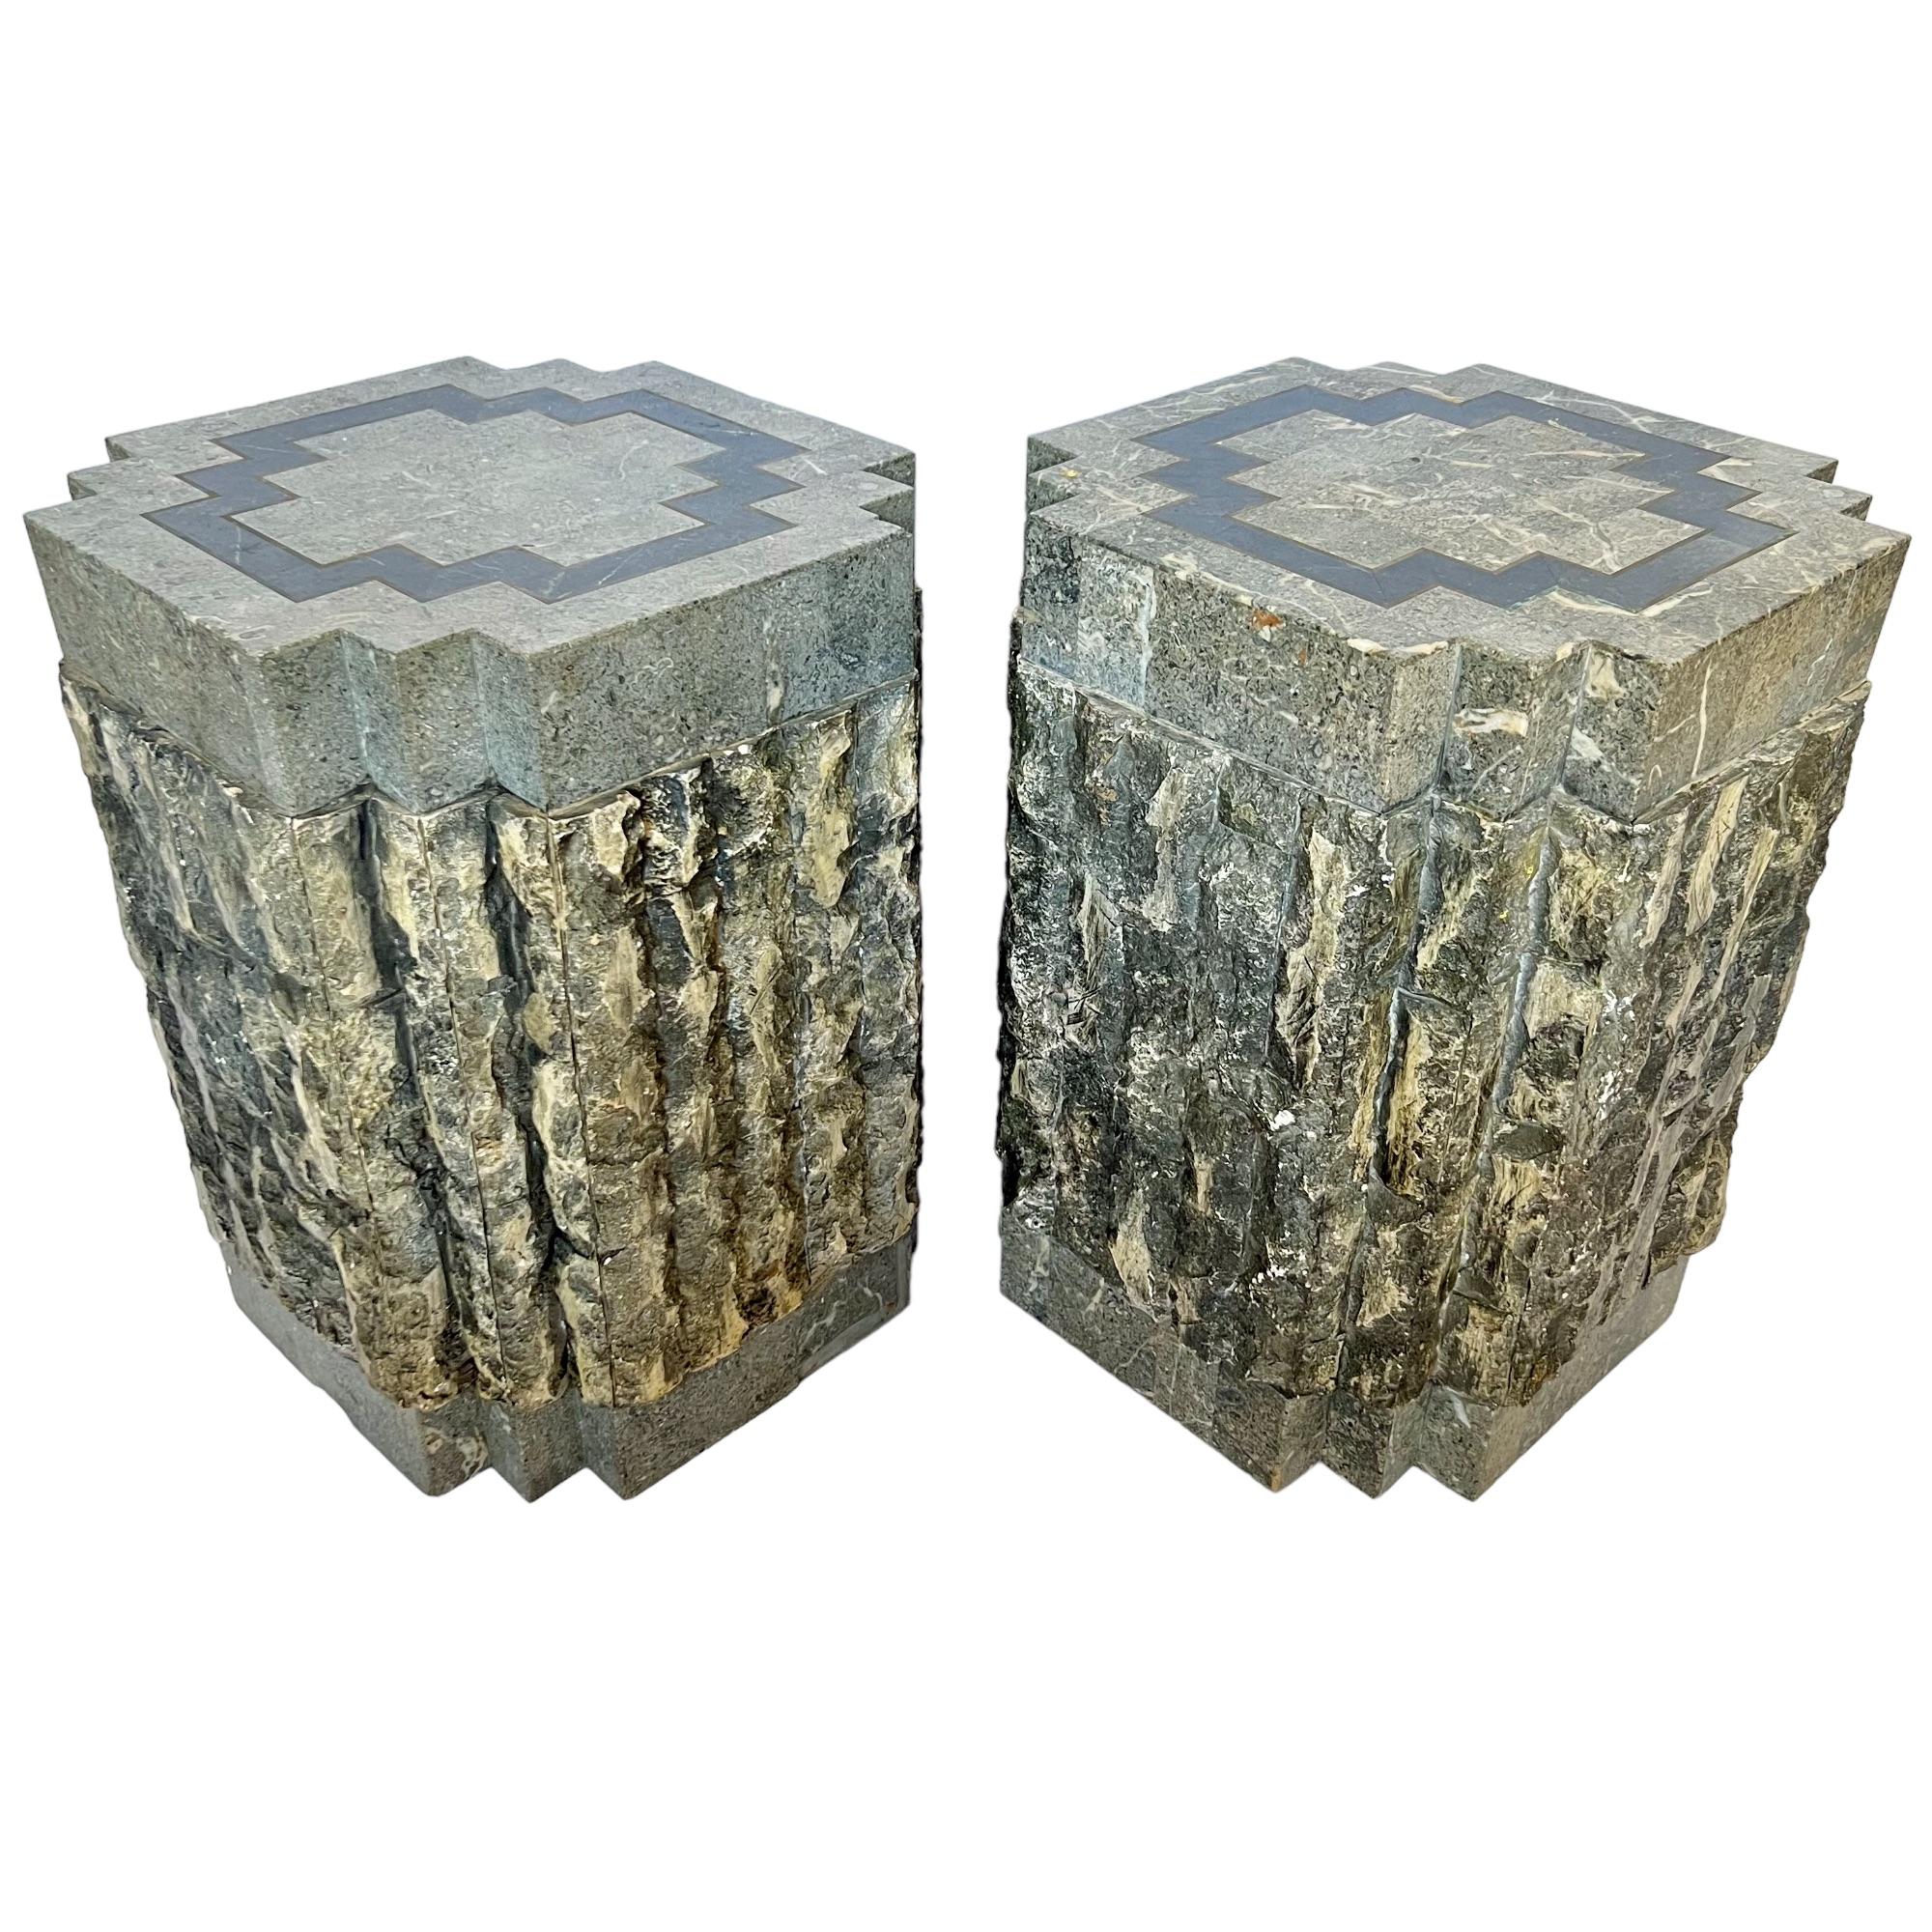 A pair of postmodern tessellated stone pedestal accent tables by Magnussen Presidential circa 1990. Wood frame with polished stone veneered base & top with brass inlay and faux rough stone side panels. They can be used separately or together with a